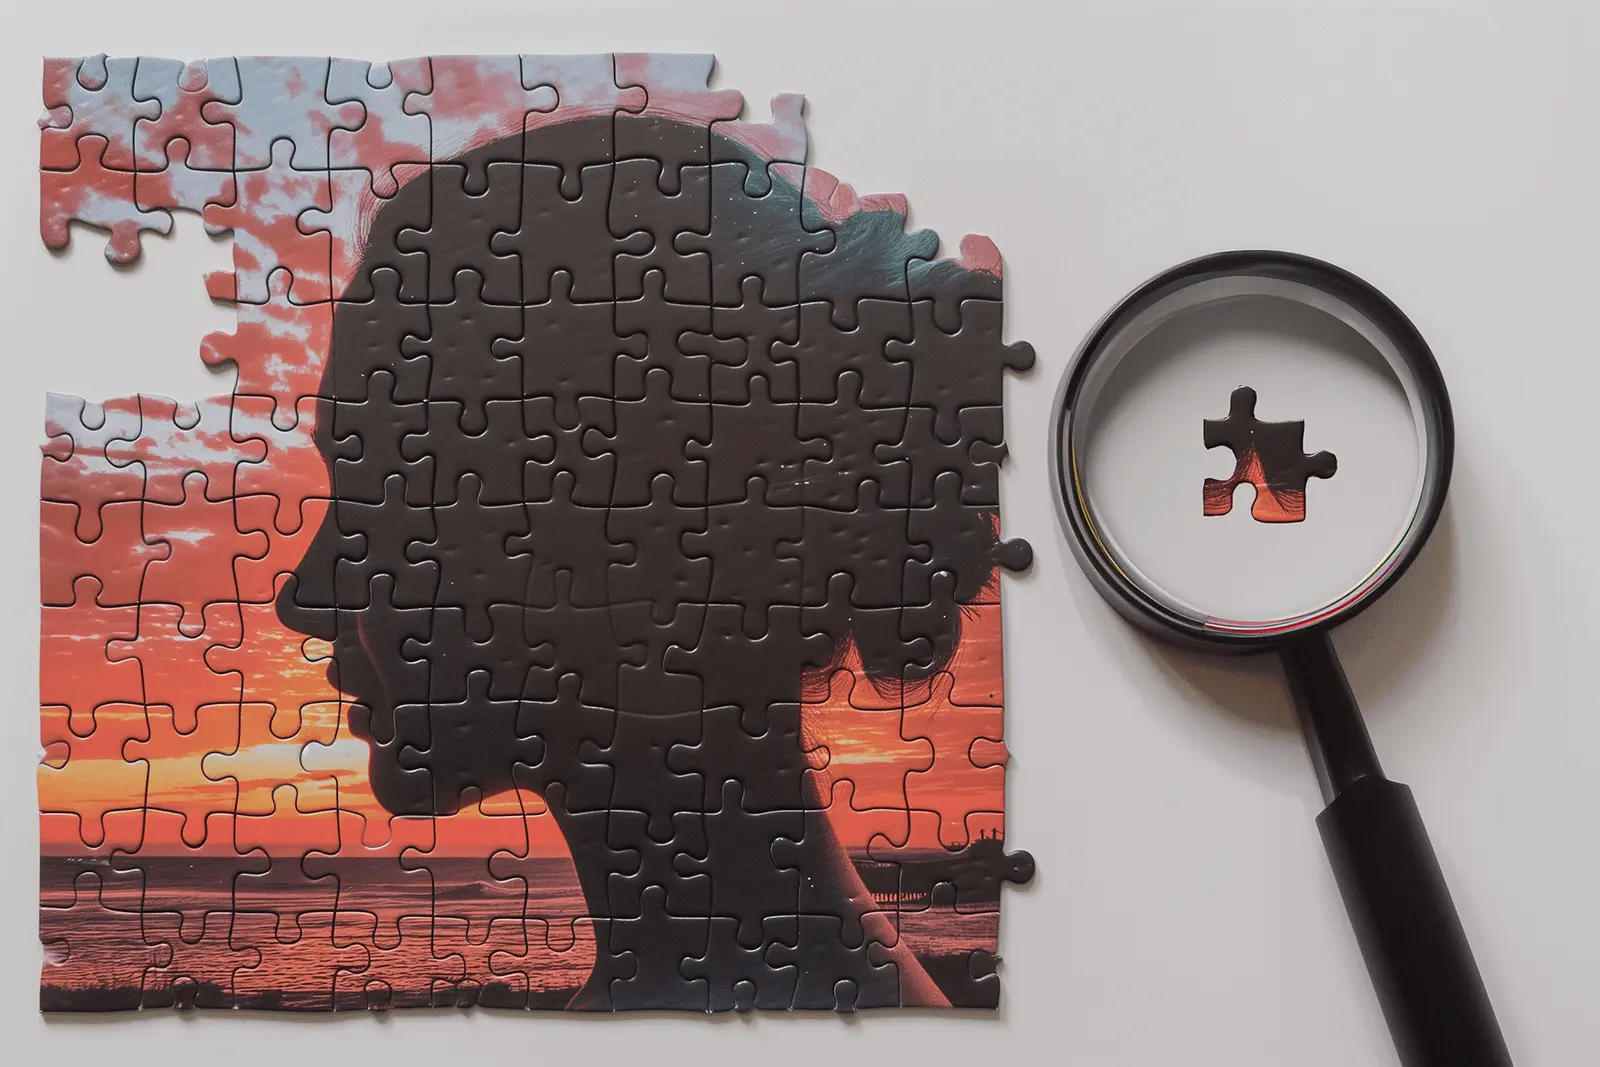 A metaphor for a CDP and a web analytics system, A CDP creates a holistic profile of a customer, a web analytics tool focuses on one puzzle piece, the online interactions.